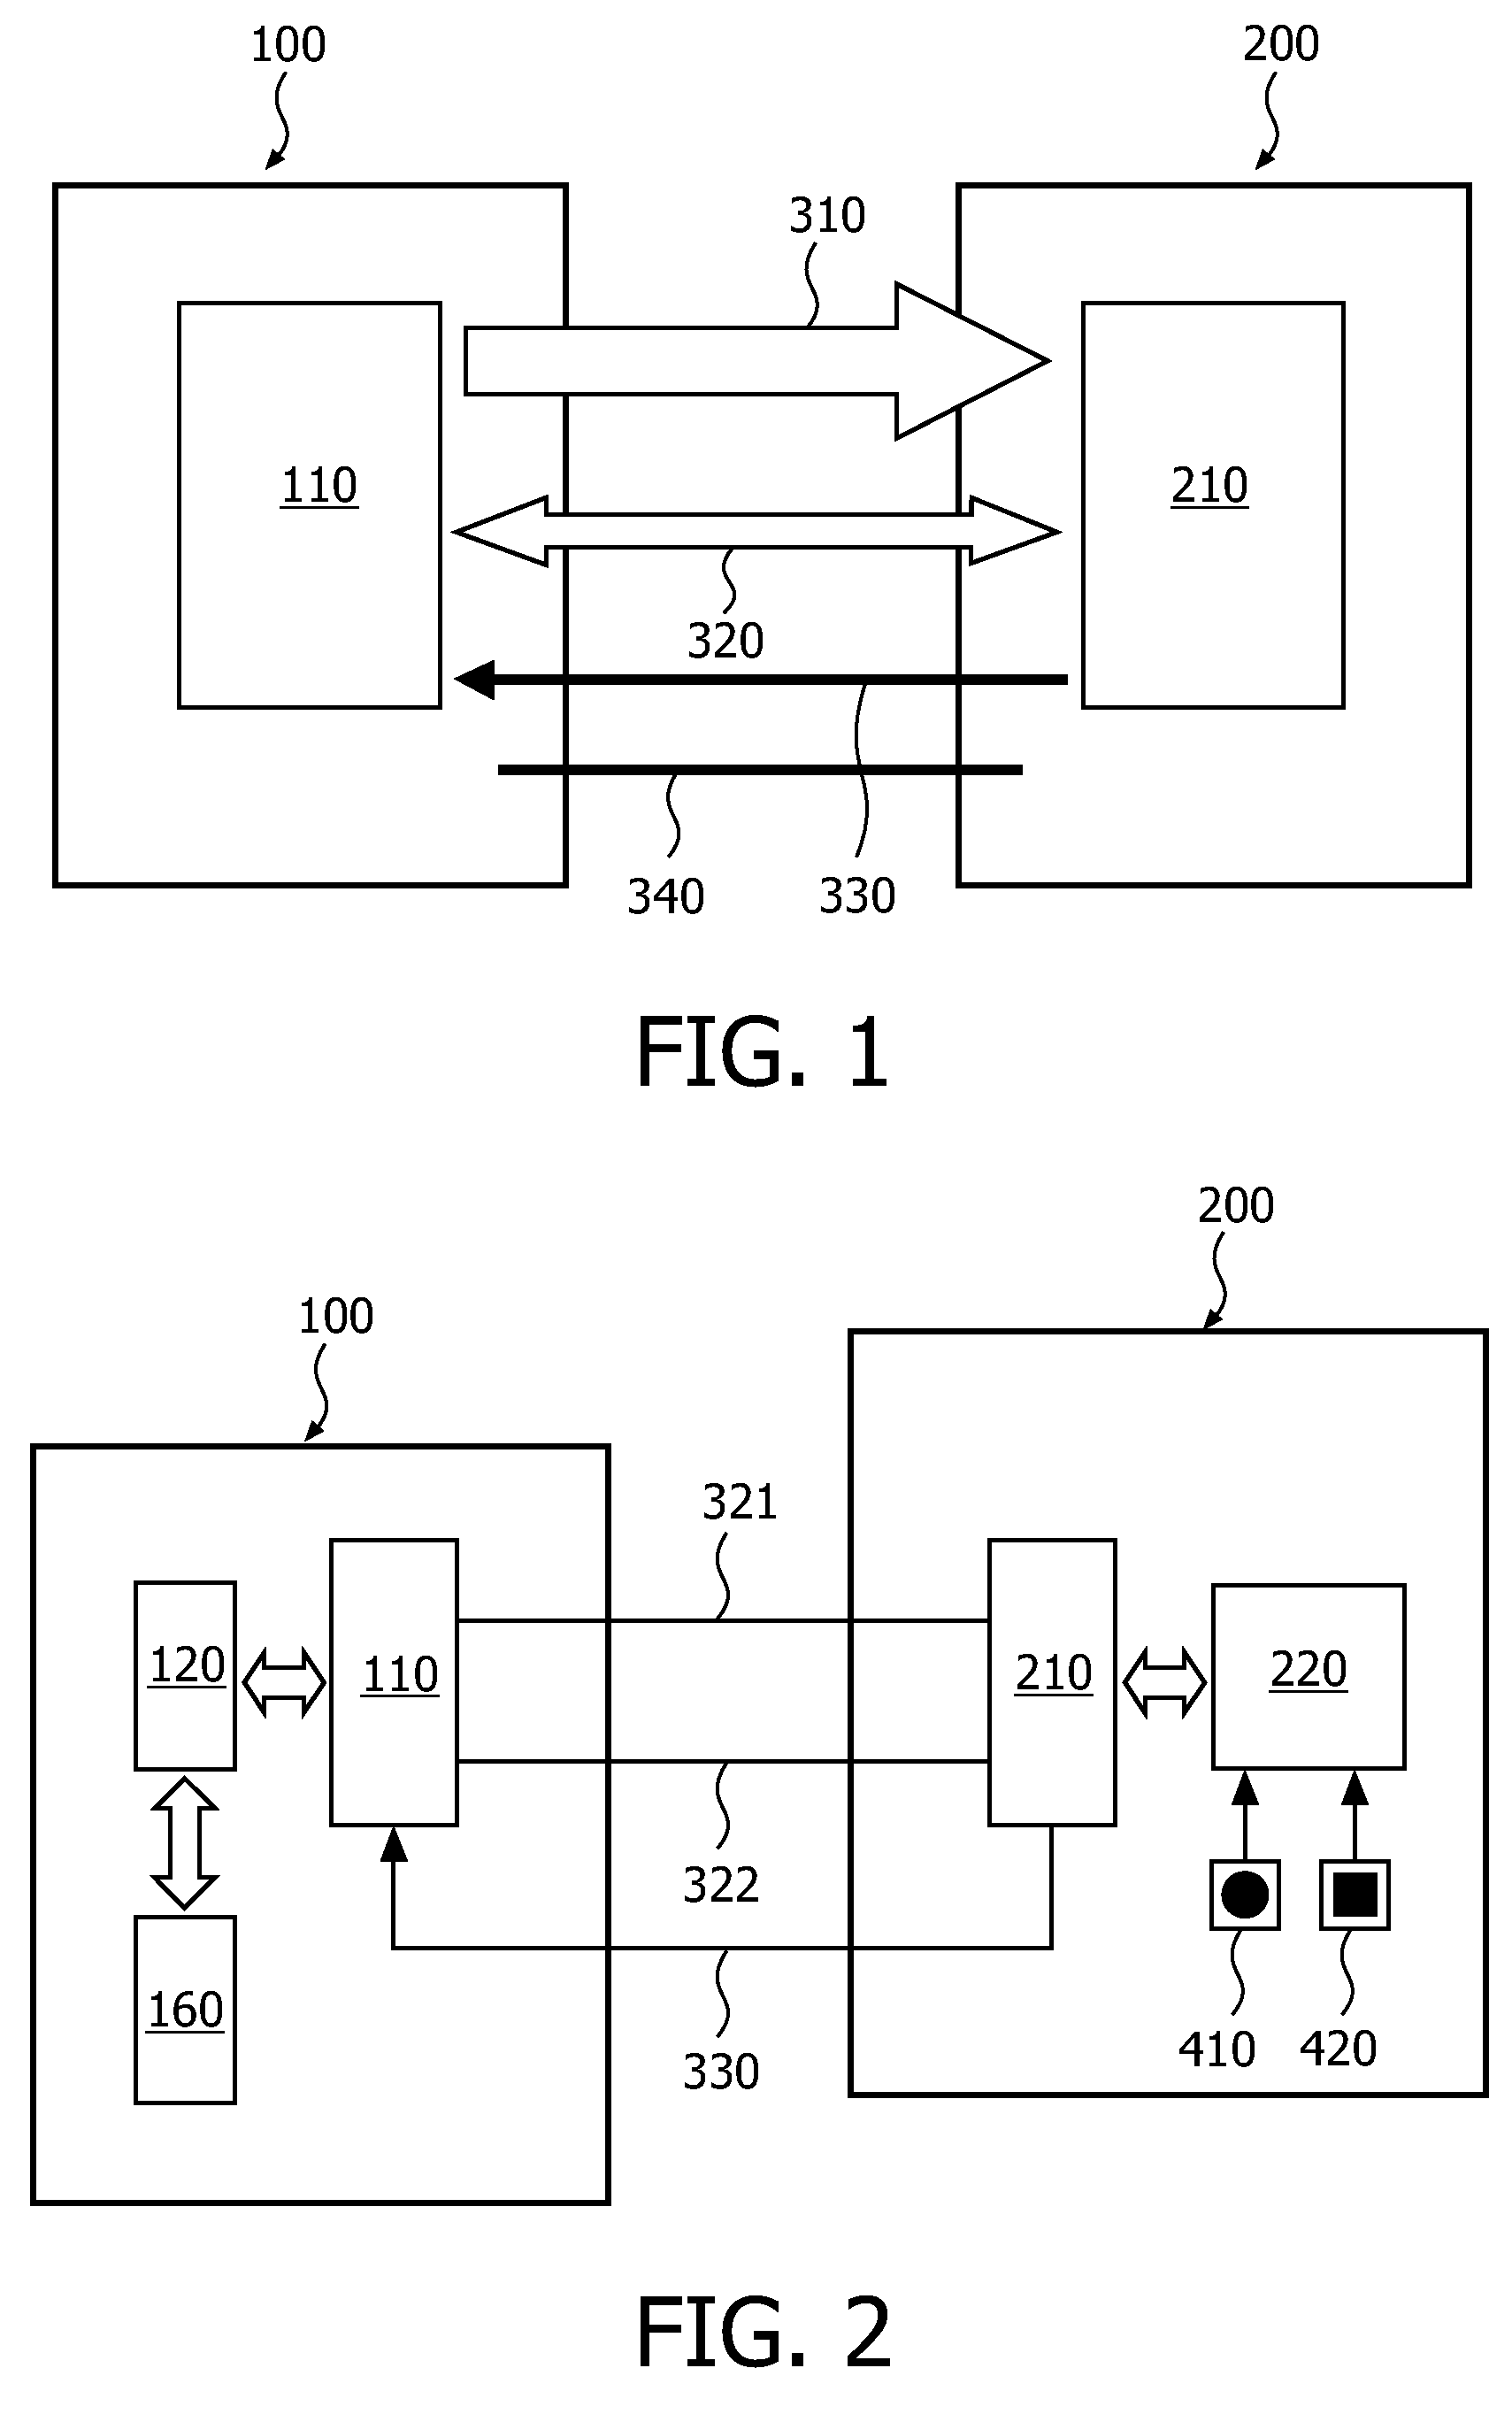 Method for switching a multimedia source and multimedia sink from an operating mode to a standby mode, and from a standby mode to an operating mode